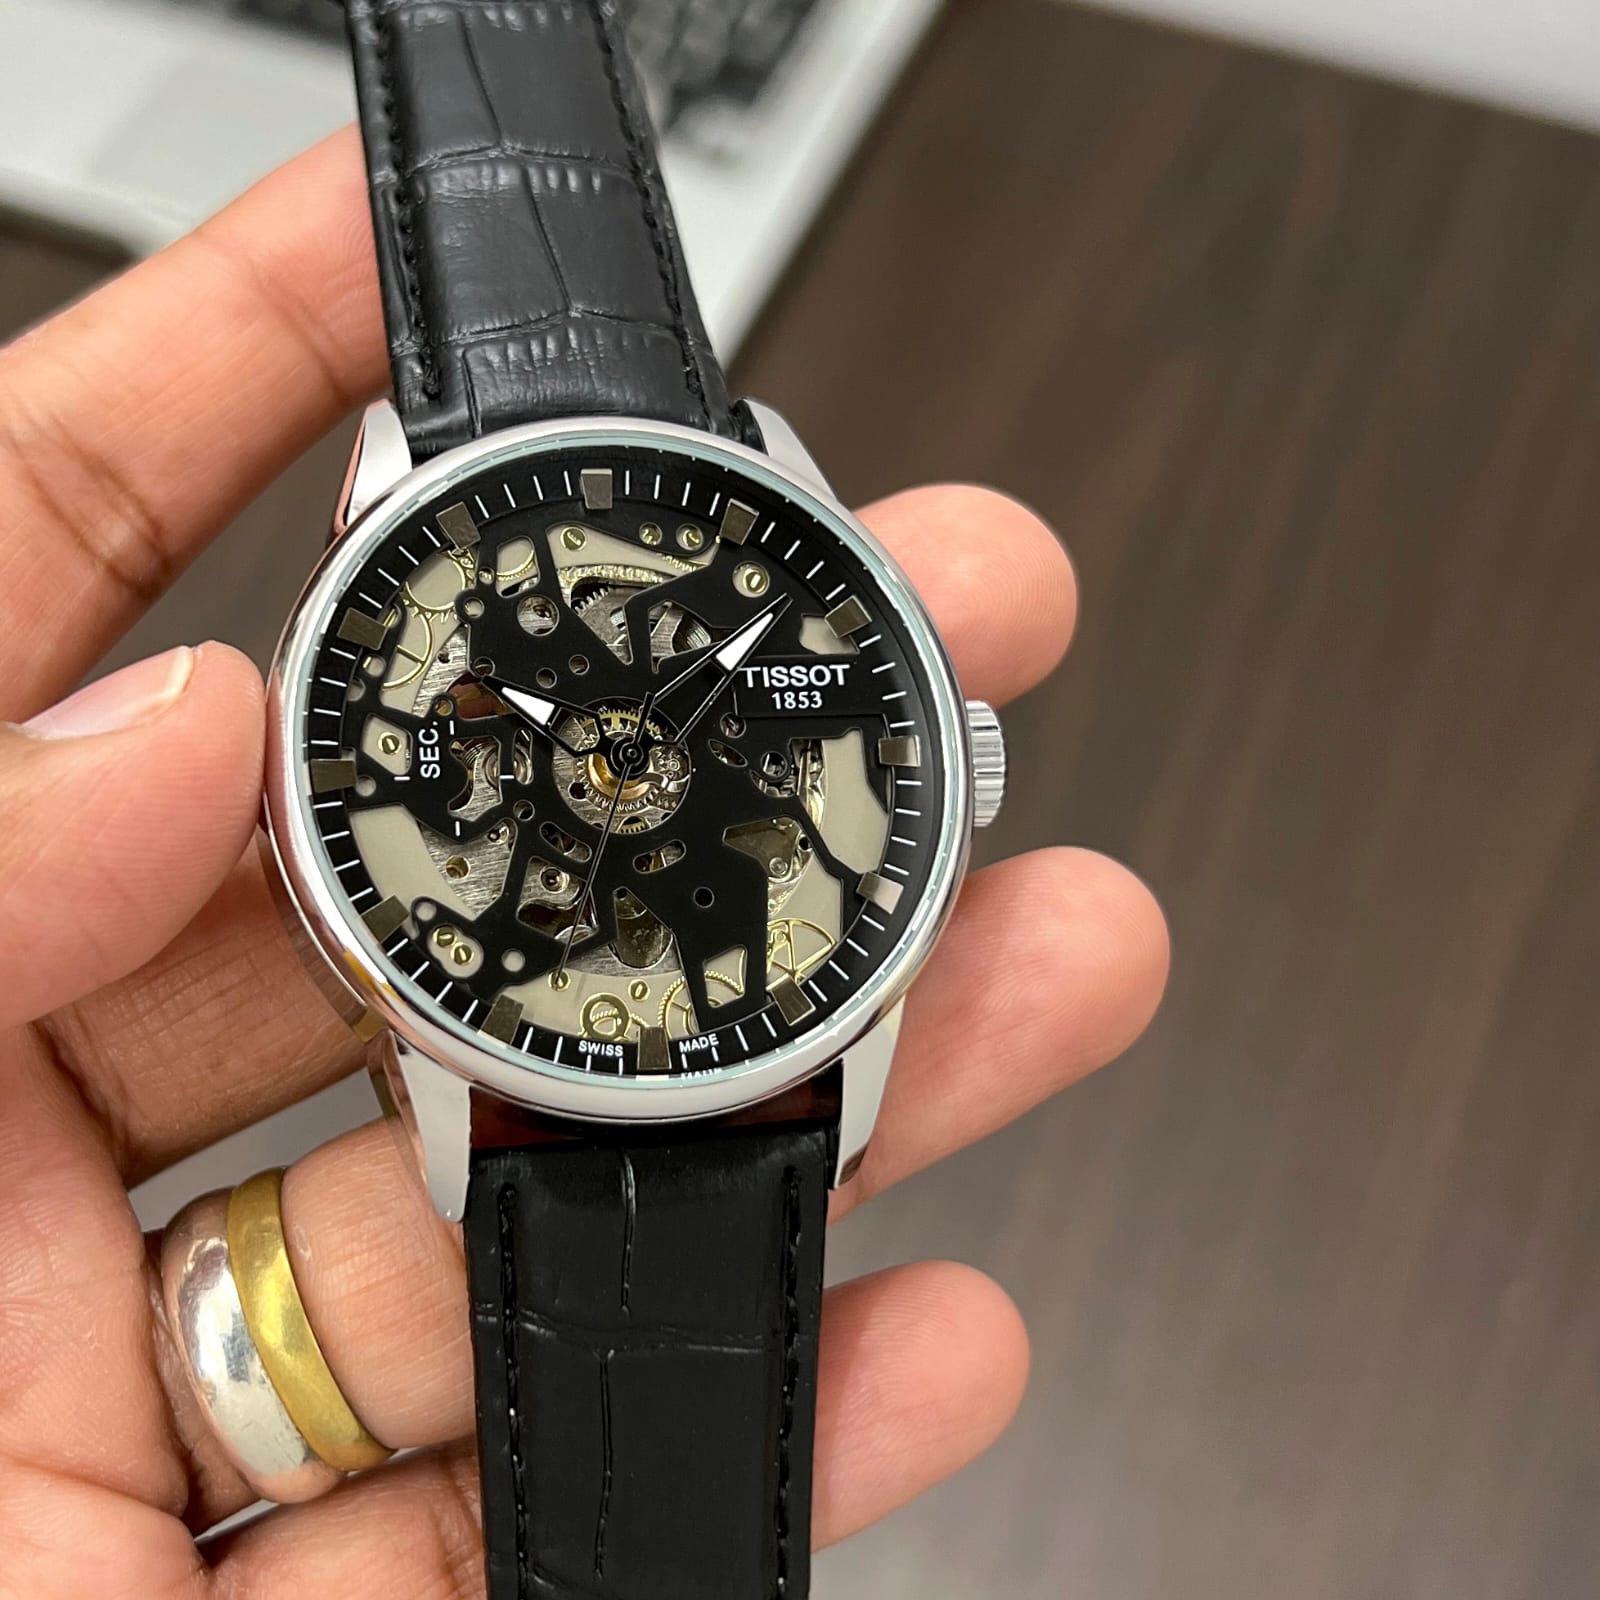 Tissot LeLocle automatic replica watches in india | premium quality watch